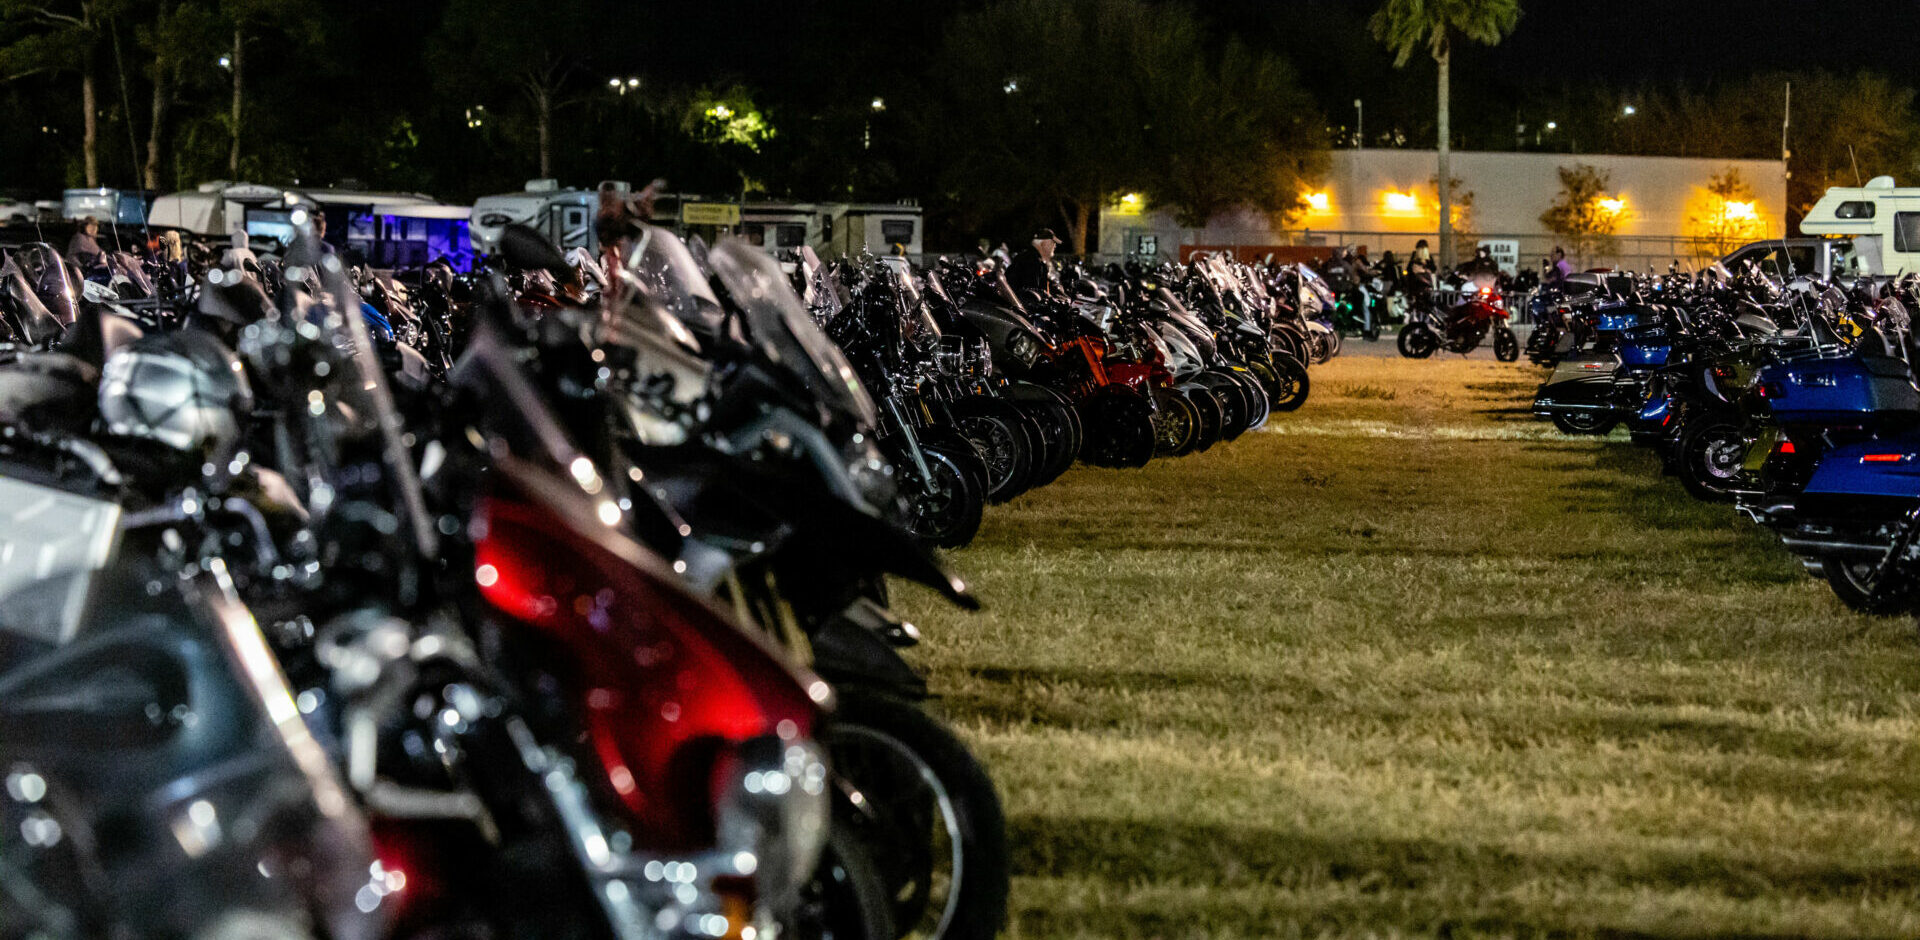 A view of the motorcycle parking area Thursday night at the American Flat Track (AFT) Daytona Short Track I at Daytona International Speedway.